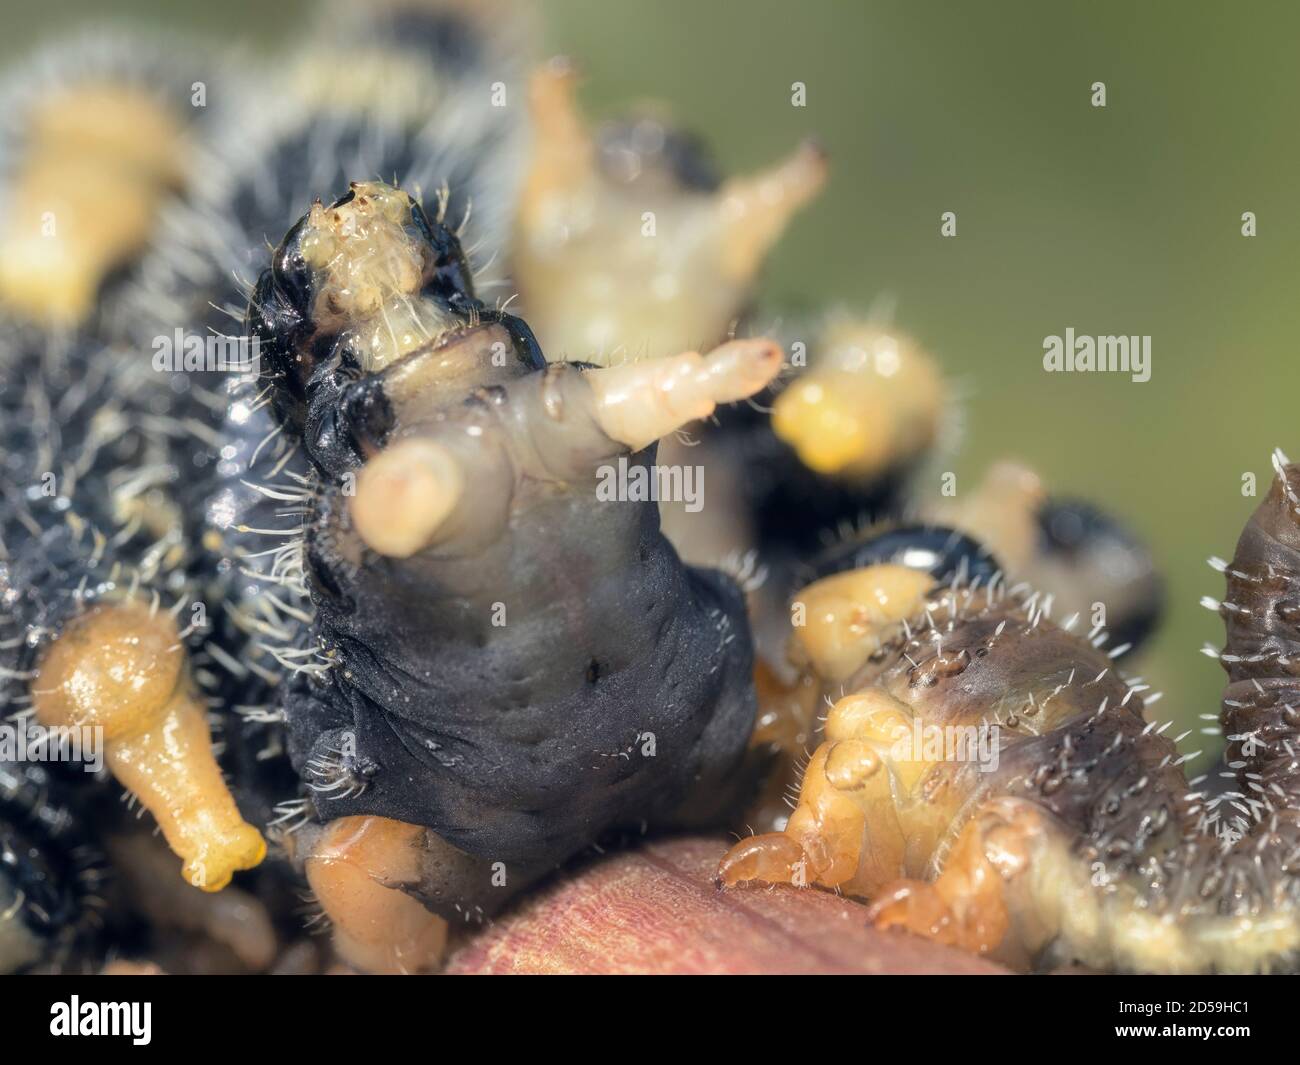 Spitfire sawfly (Perga affinis) larvae in defensive posture on branch, Australia Stock Photo